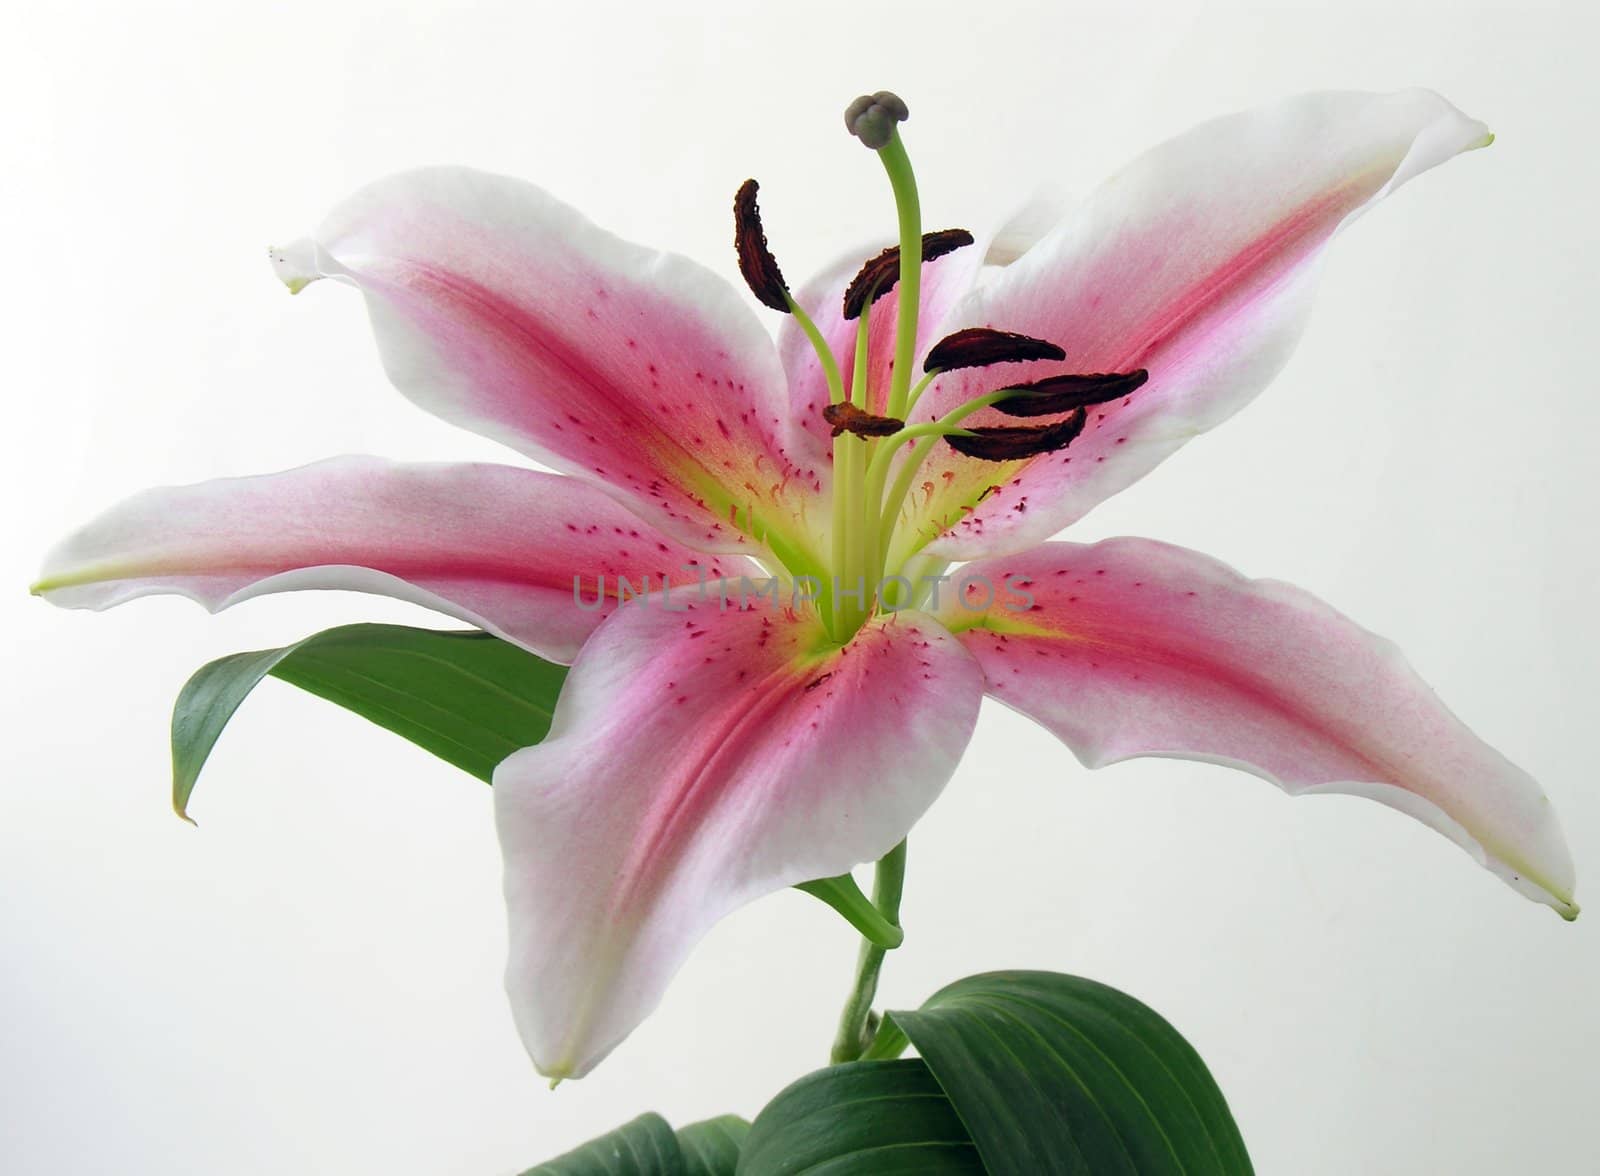 lilies are some of more beautiful flowers